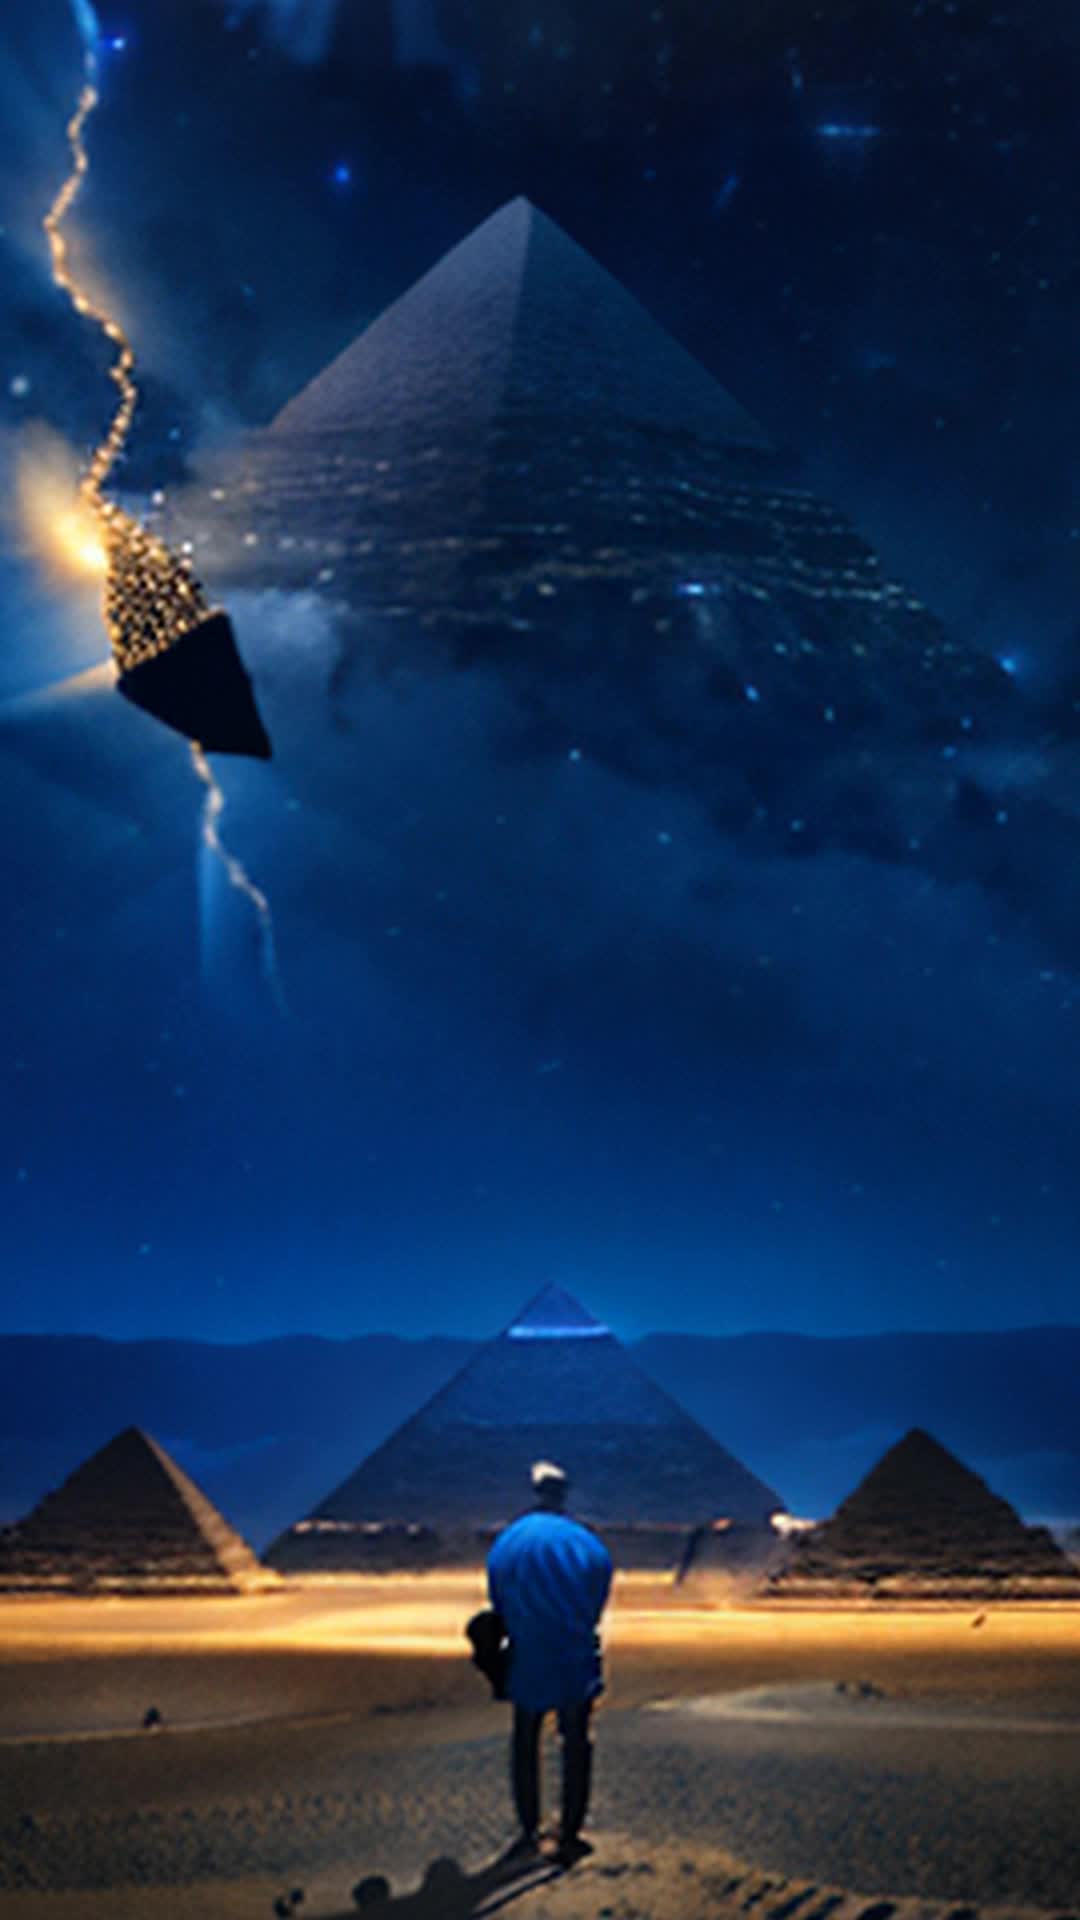 Dark blue African sky, man spotting three gleaming pyramids floating among stars, mysterious, ethereal